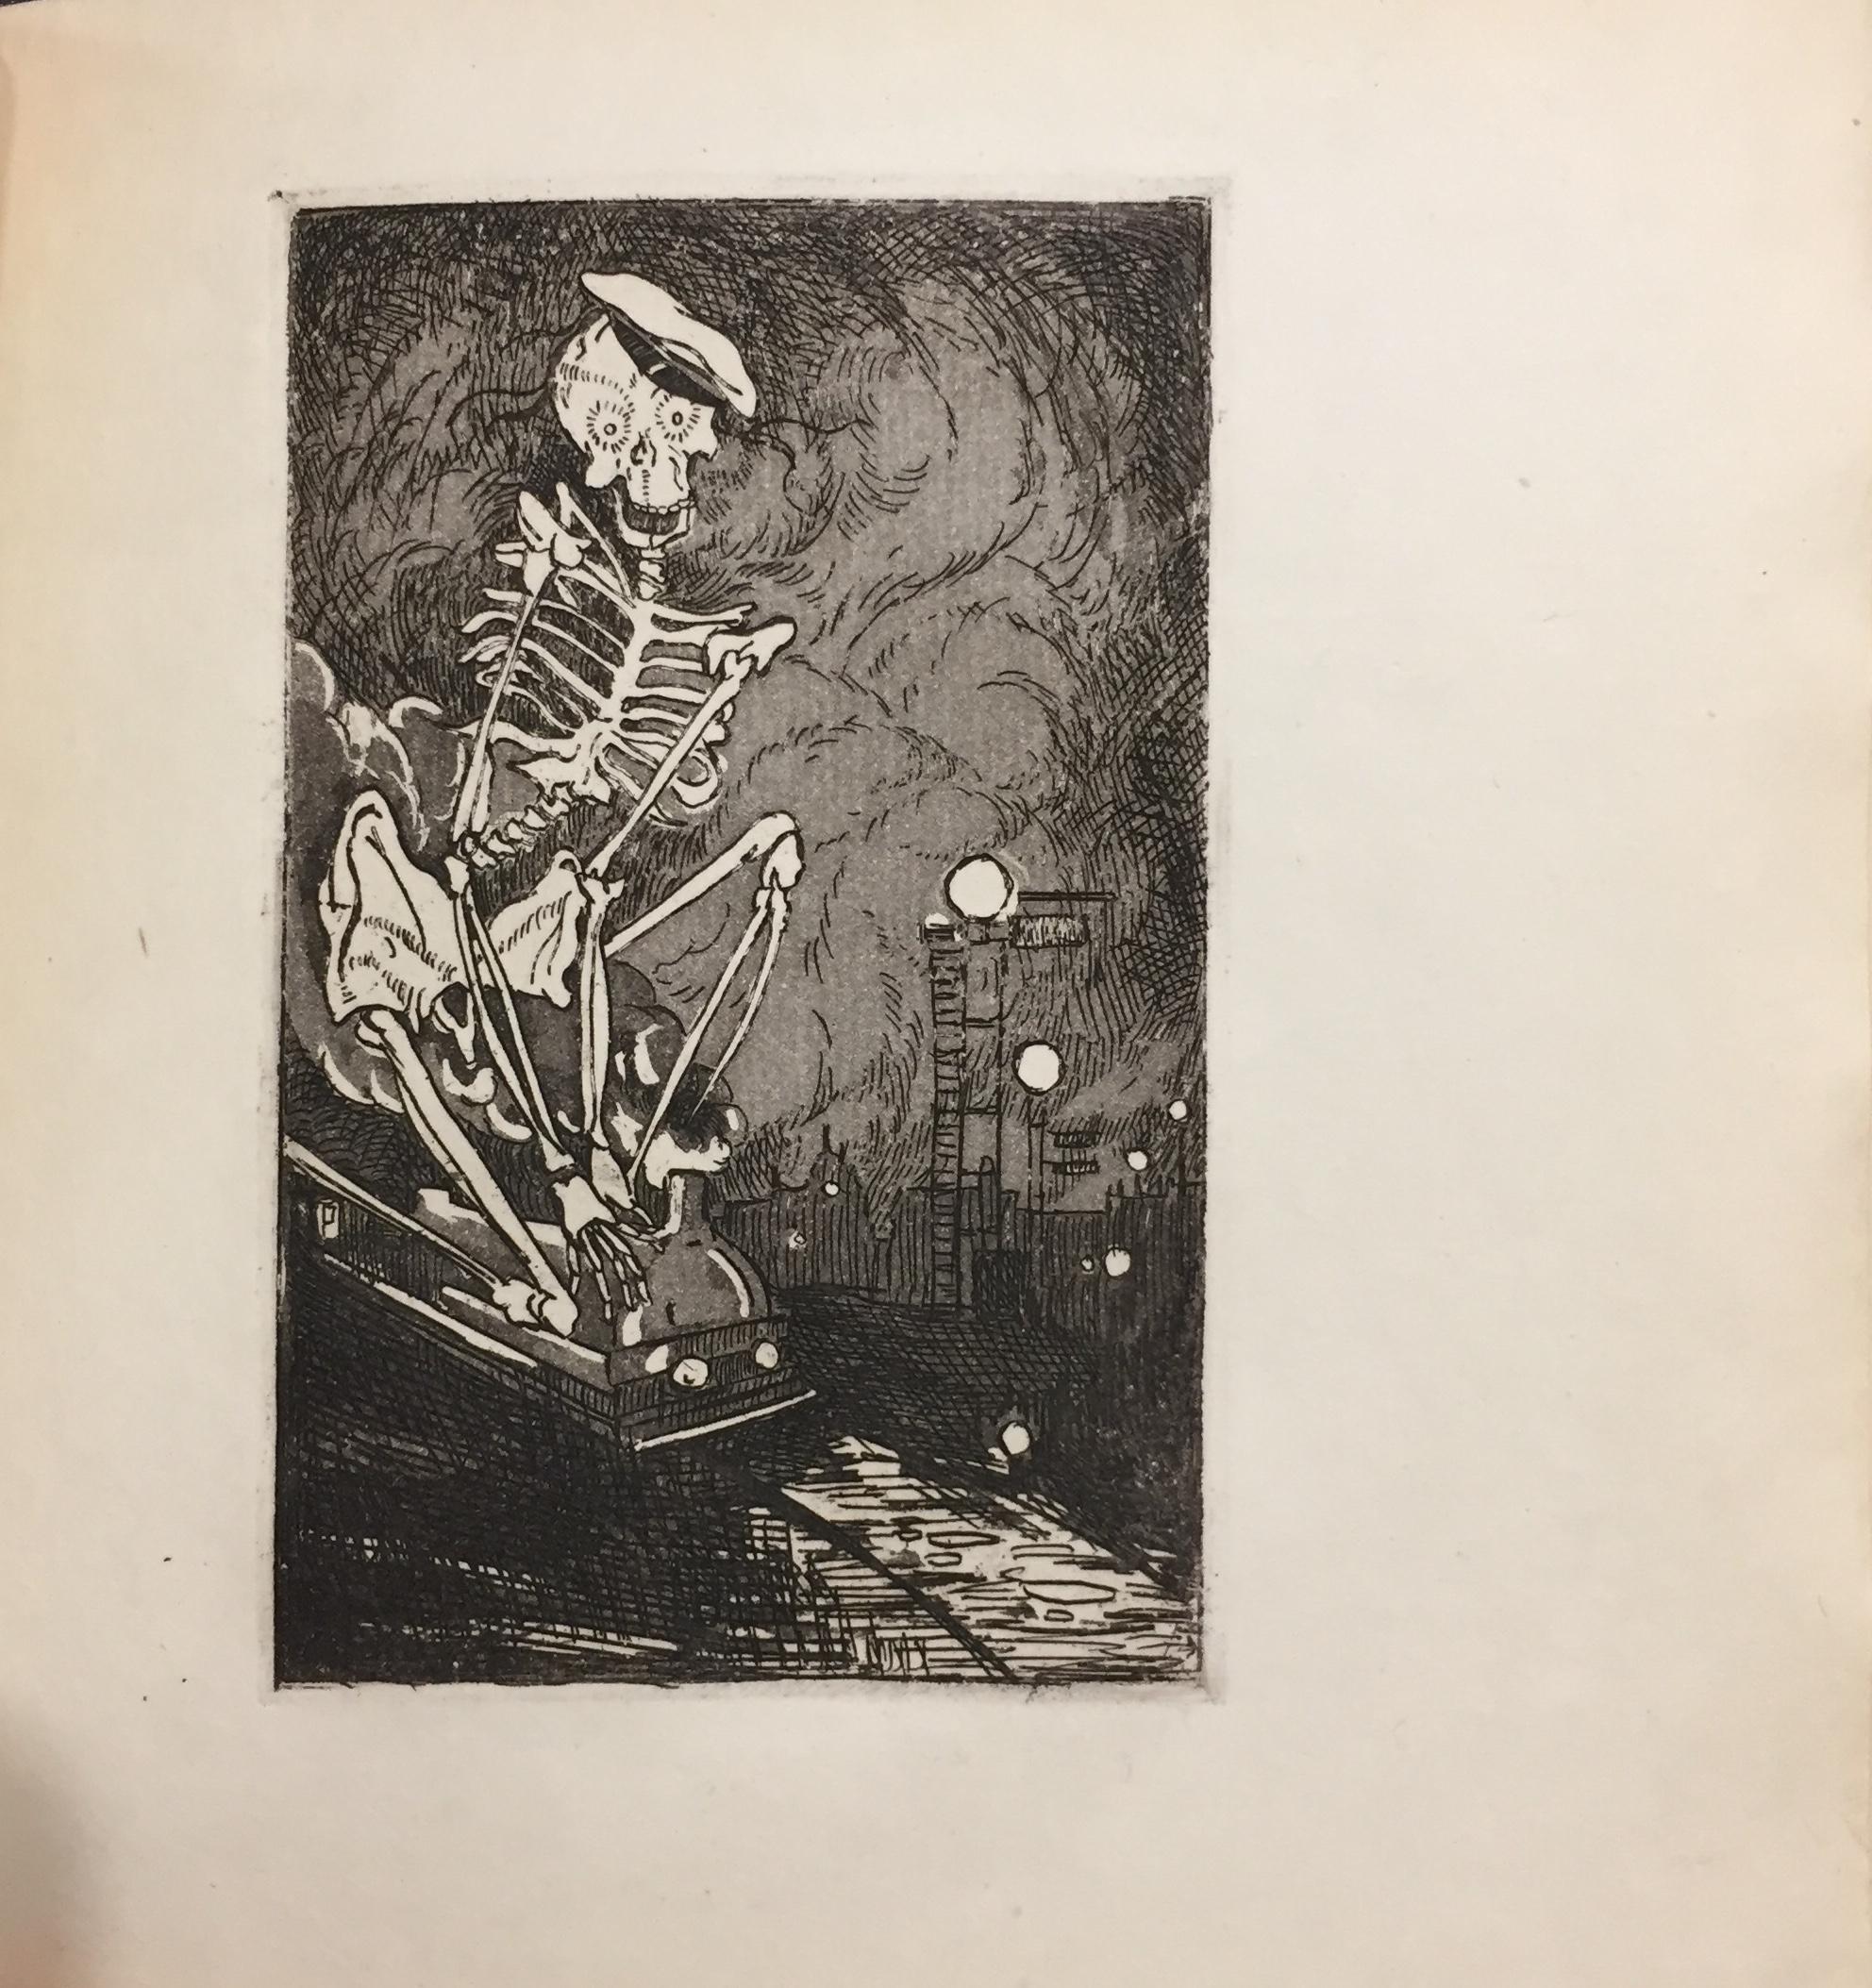 Gestes - Rare Book Illustrated by Alfred Jarry - 1920 For Sale 8